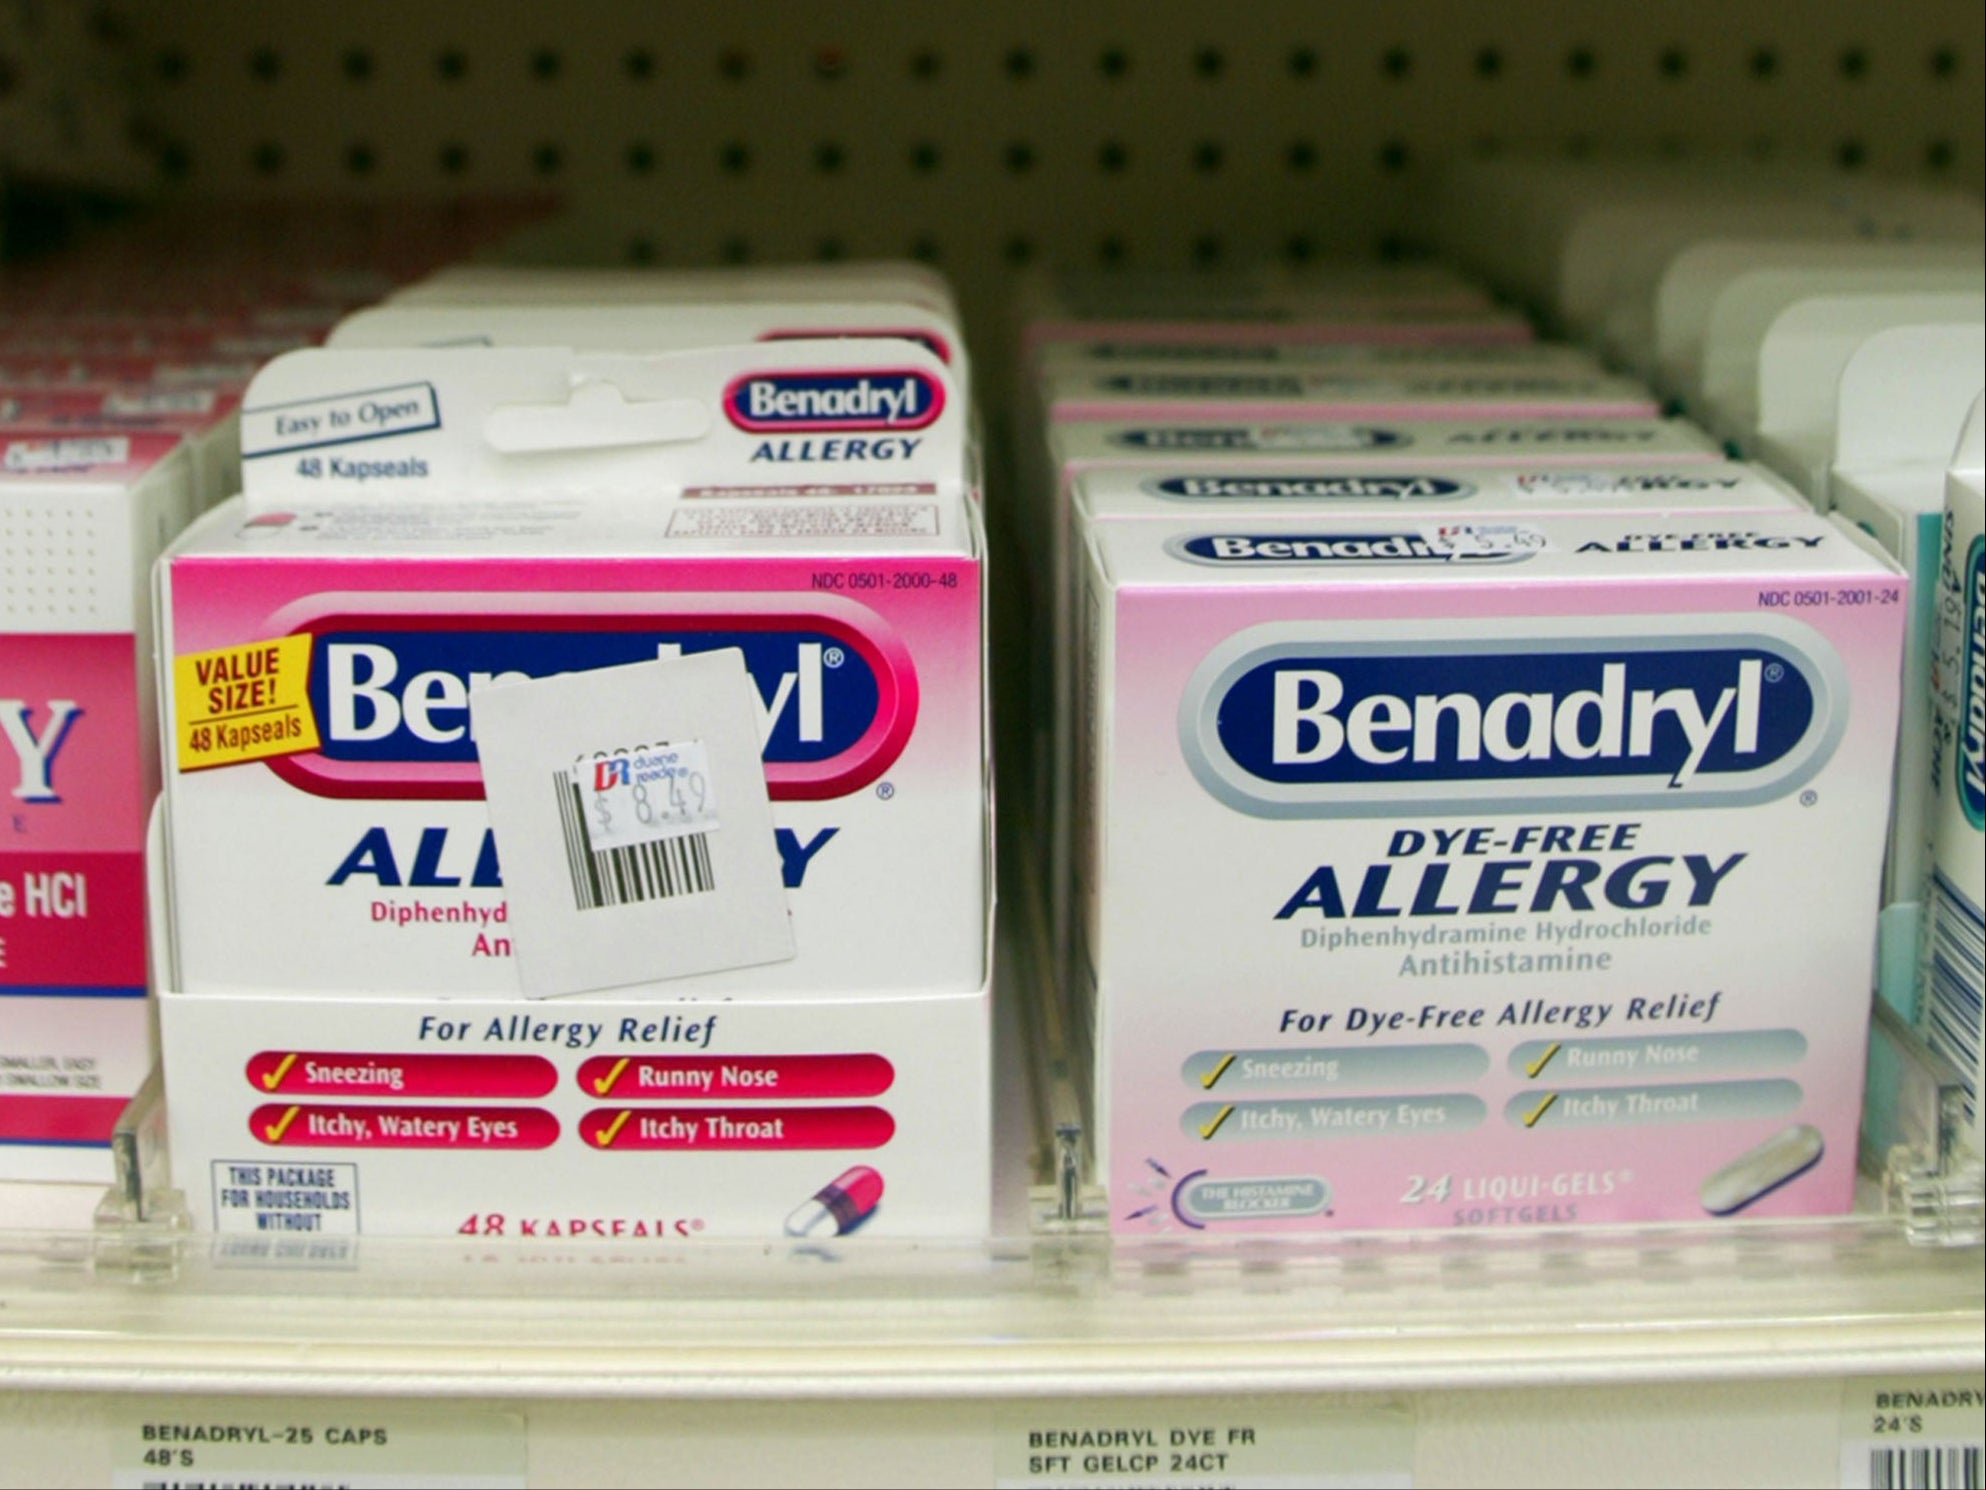 A Texas mother admitted giving her child Benadryl to fake seizures